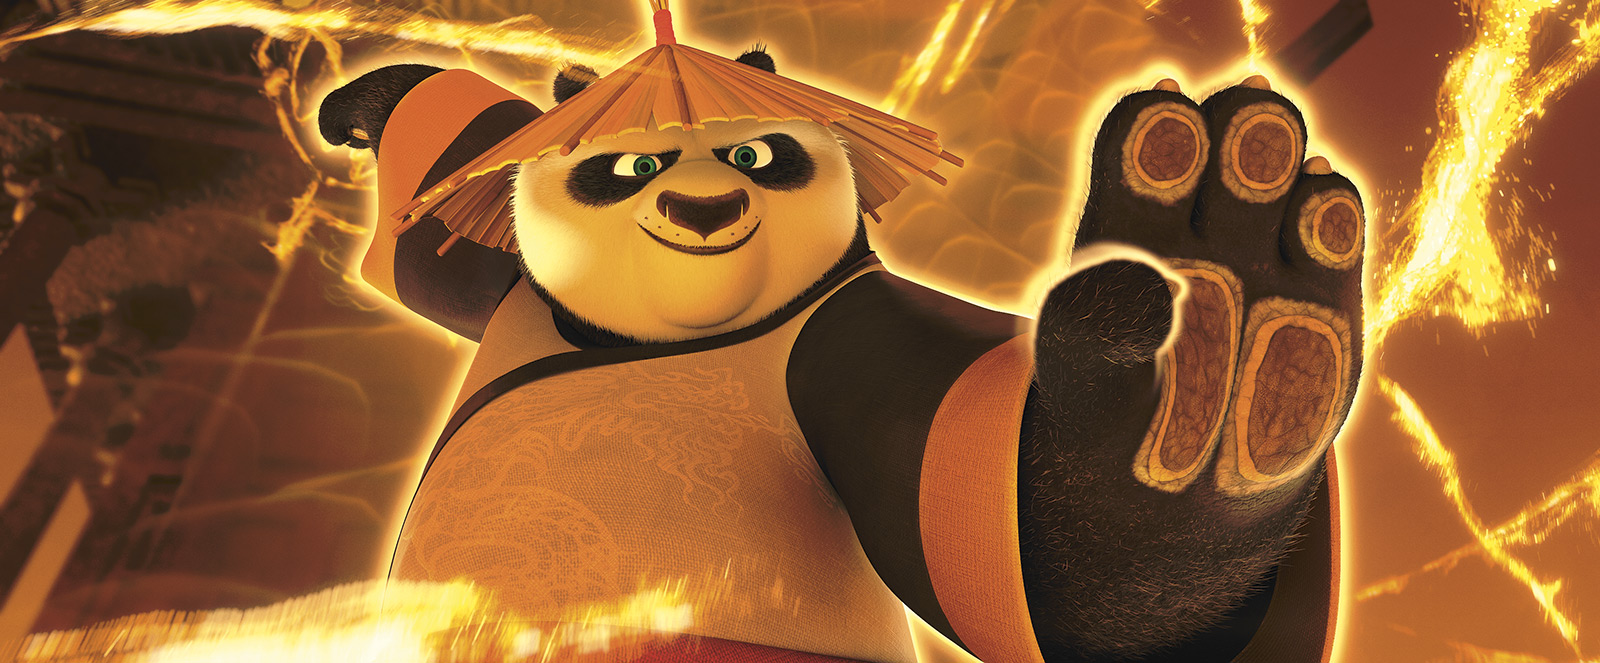 ‘Kung Fu Panda 3’ Review: Po Is Back And Better Than Ever